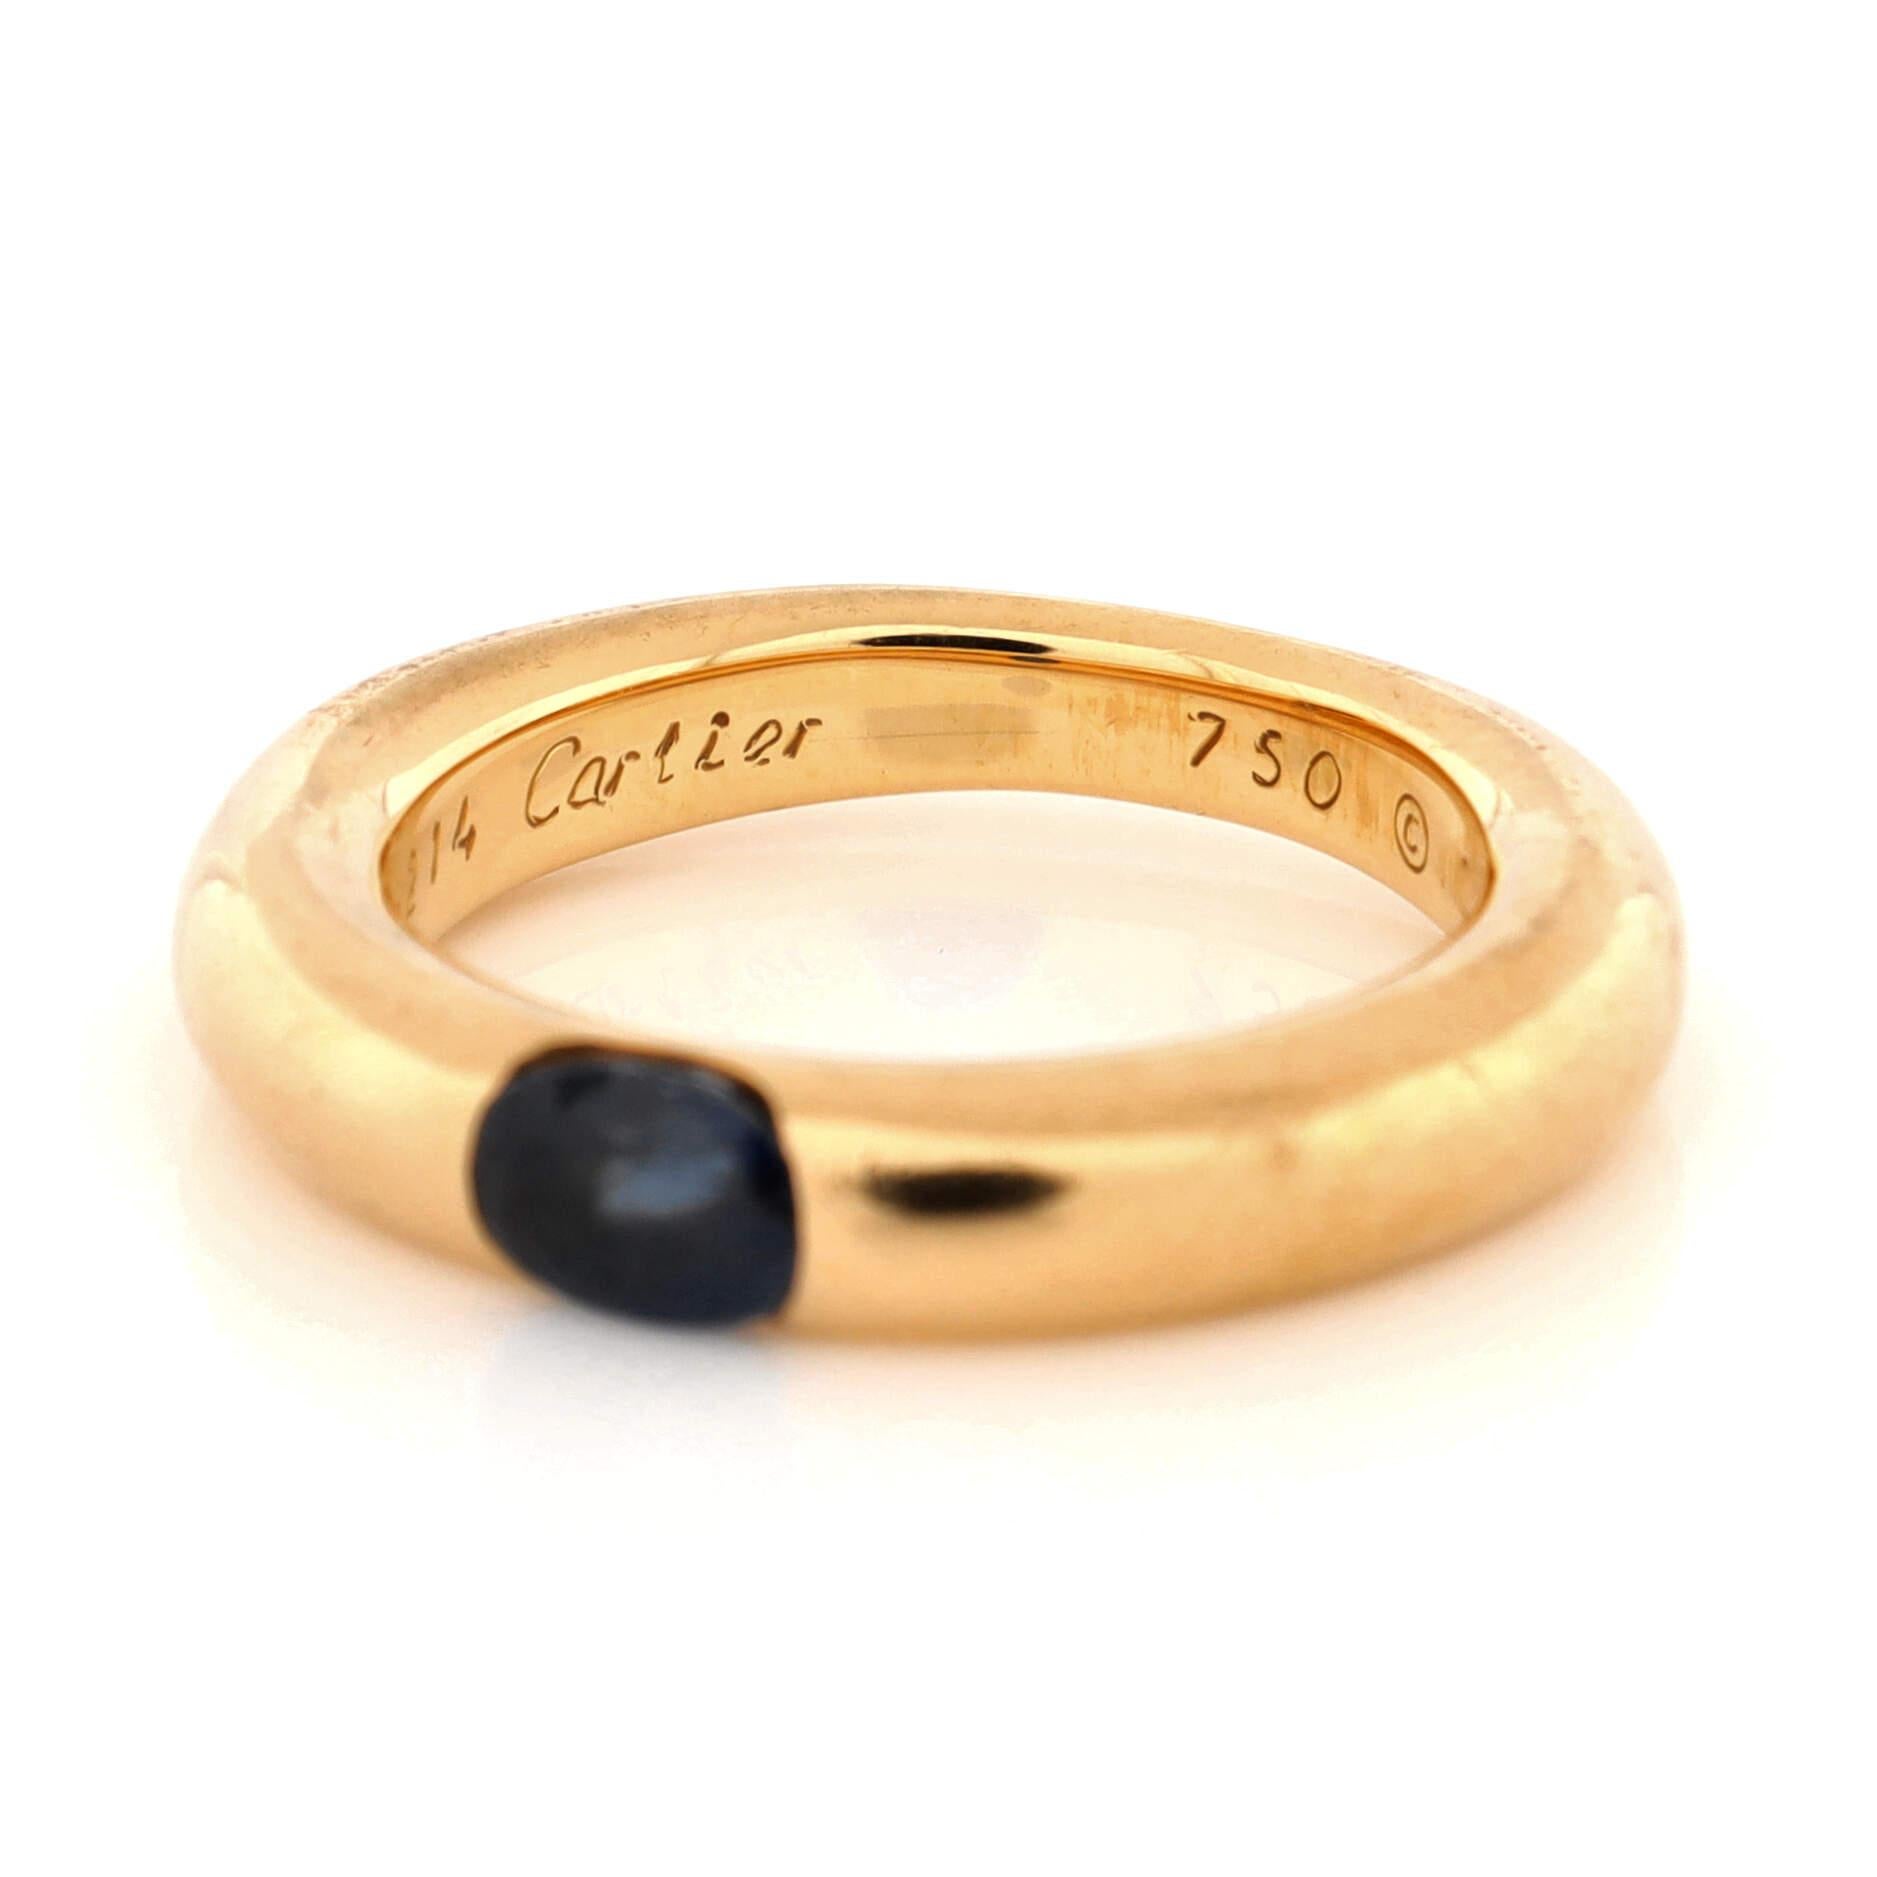 Women's or Men's Cartier Eclipse Ring 18k Yellow Gold with Sapphire